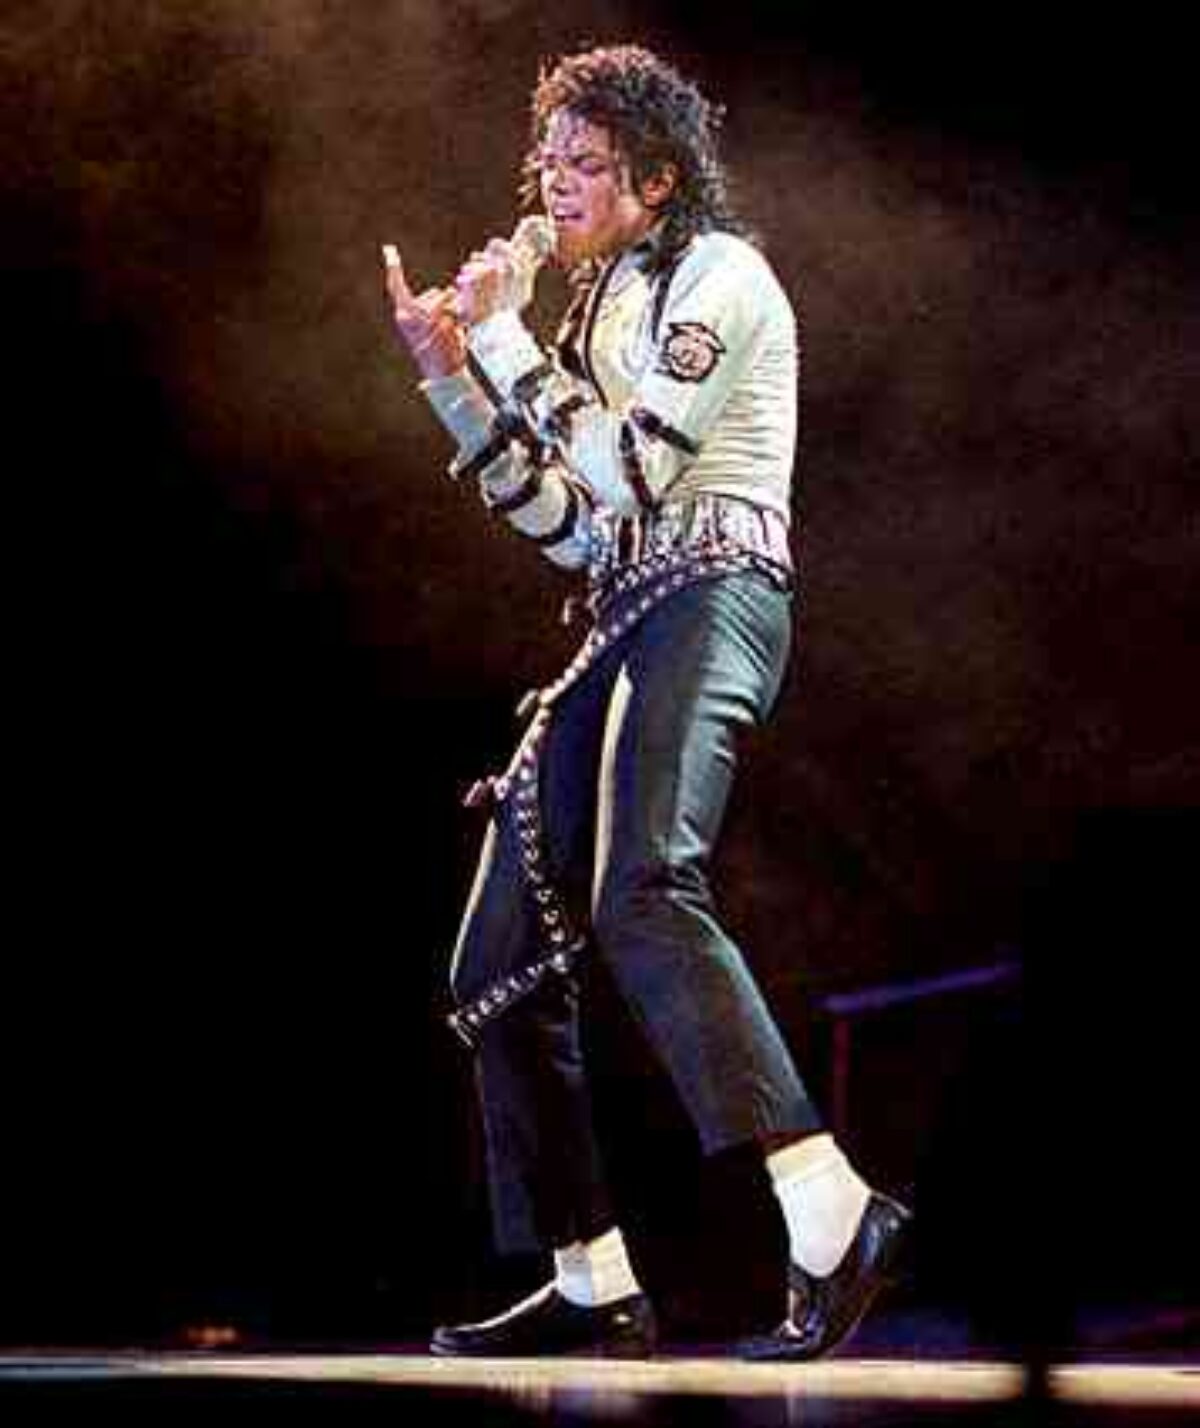 Fashion Alert: We Cannot Get Over These Iconic Outfits By Michael Jackson